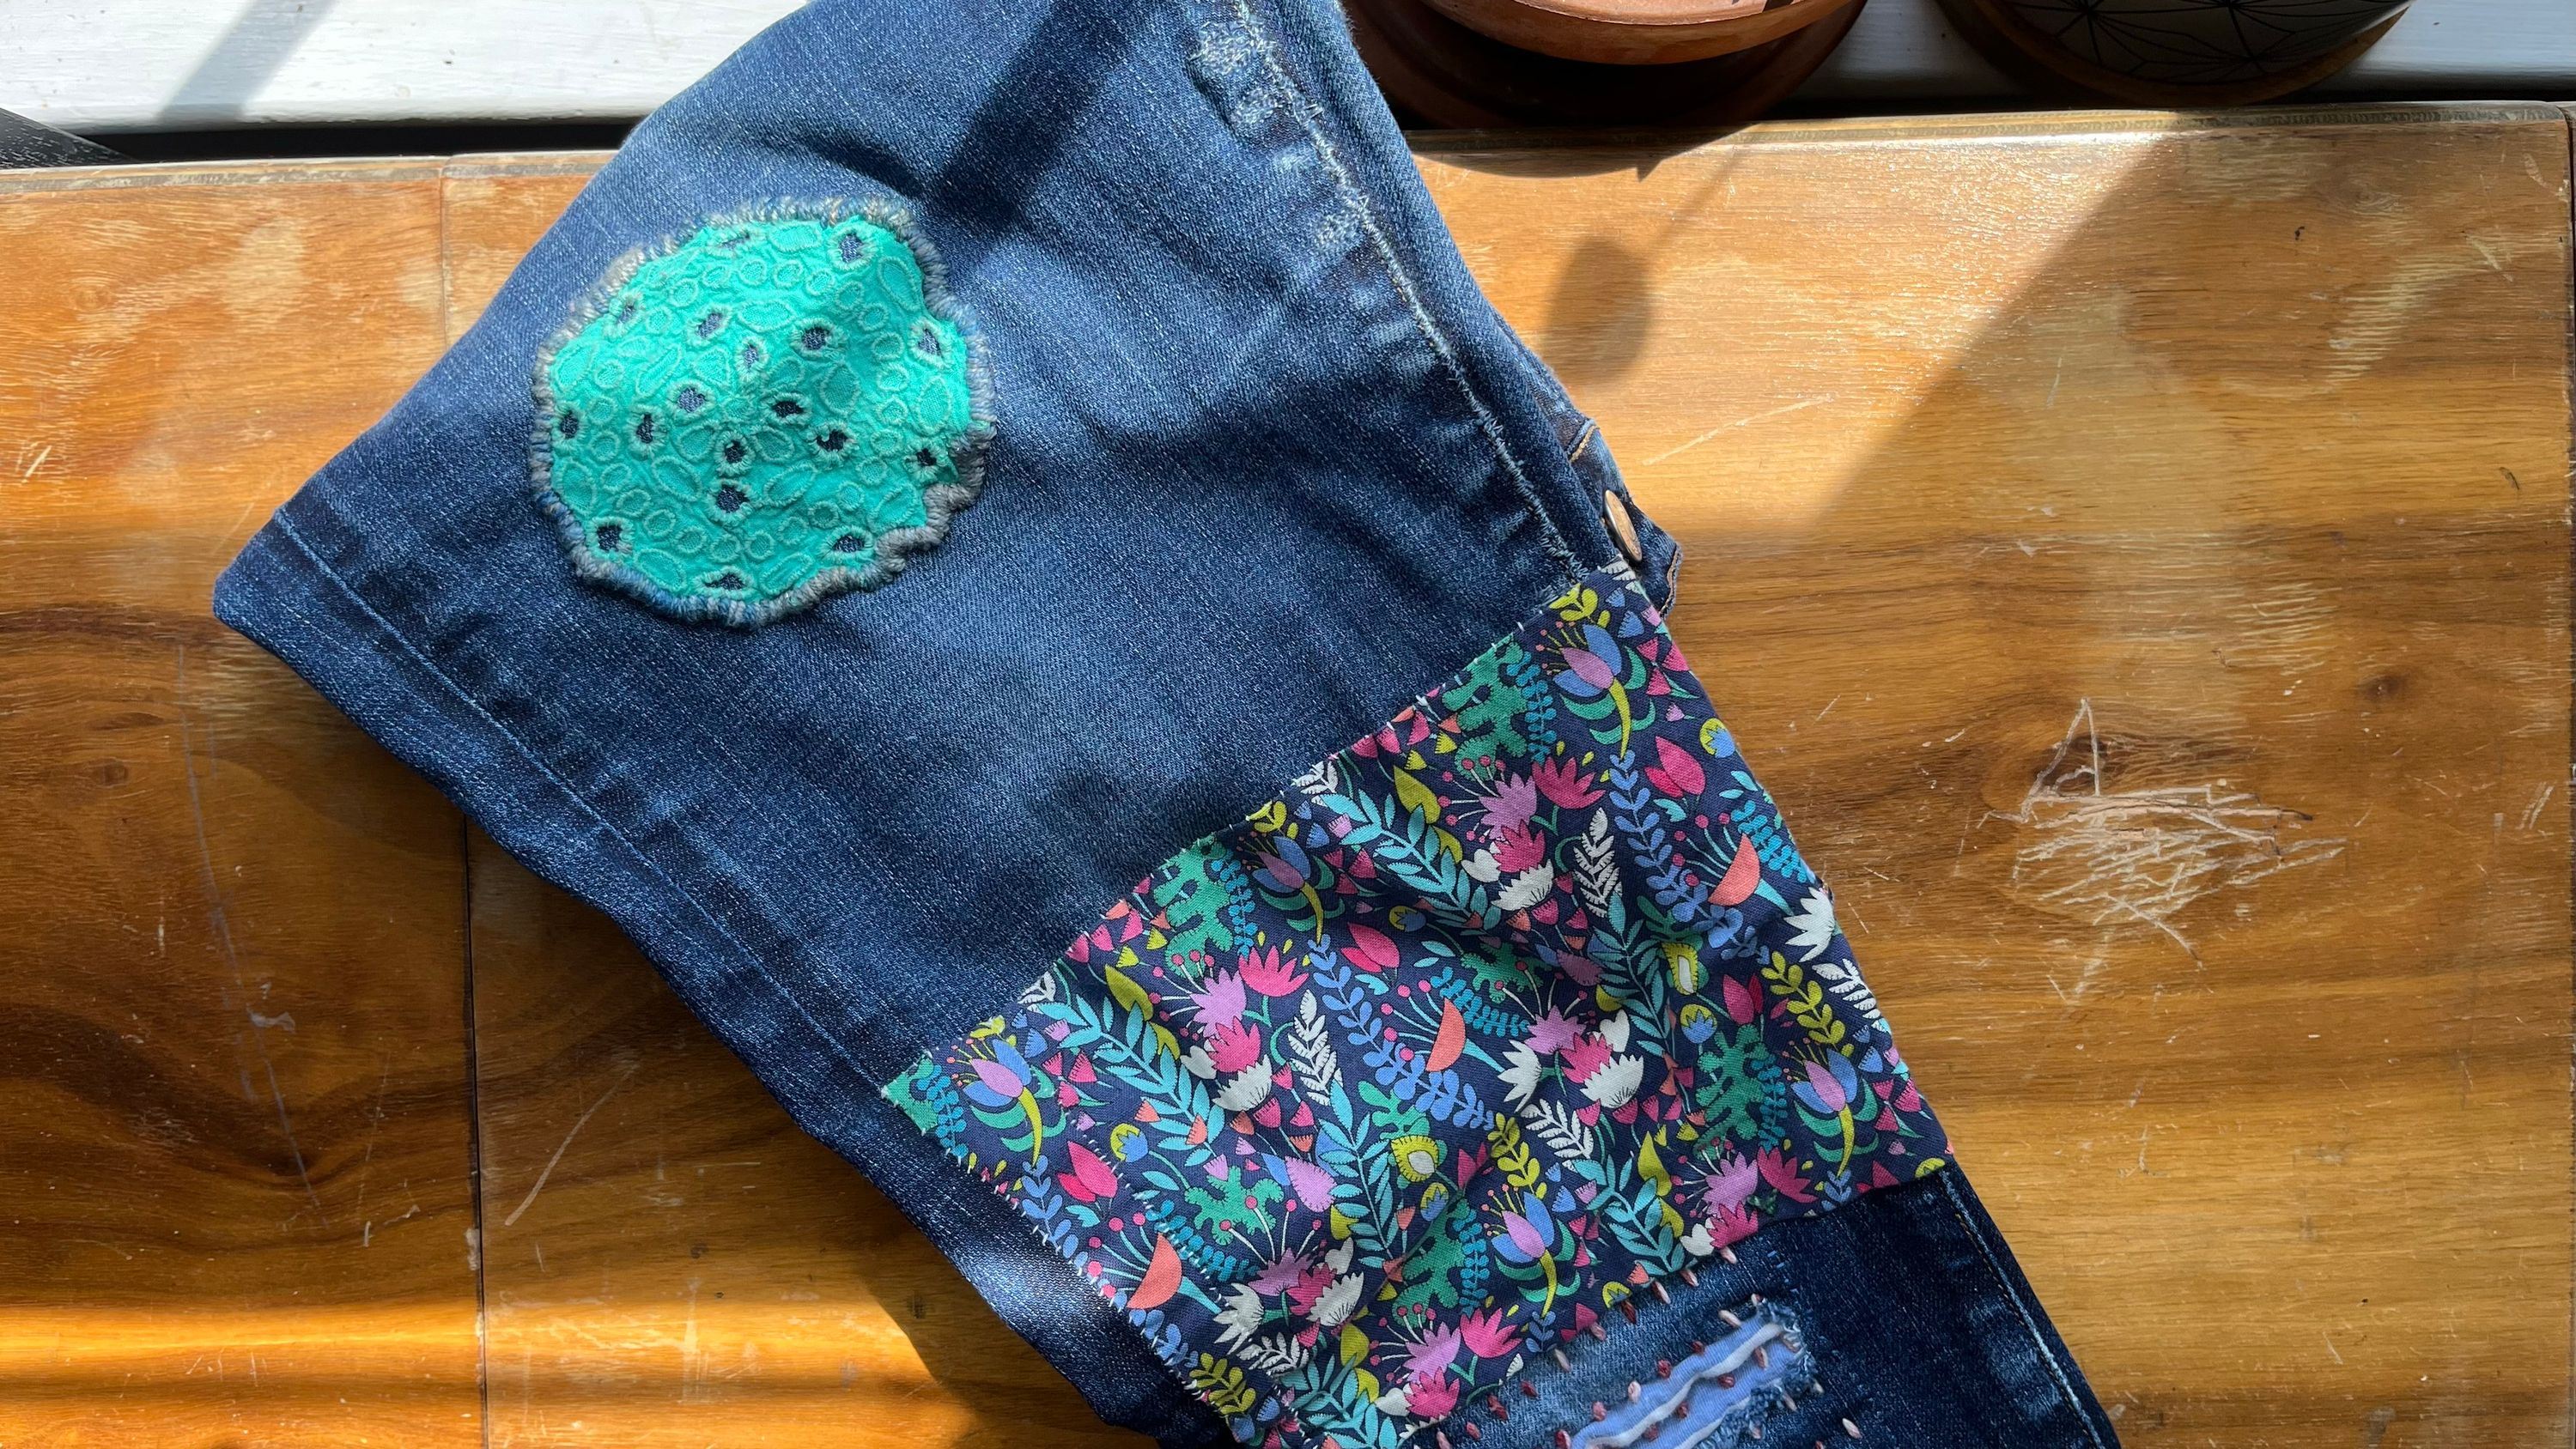 One leg on my Work Jeans, mended with some fun fabrics I have in my stash.